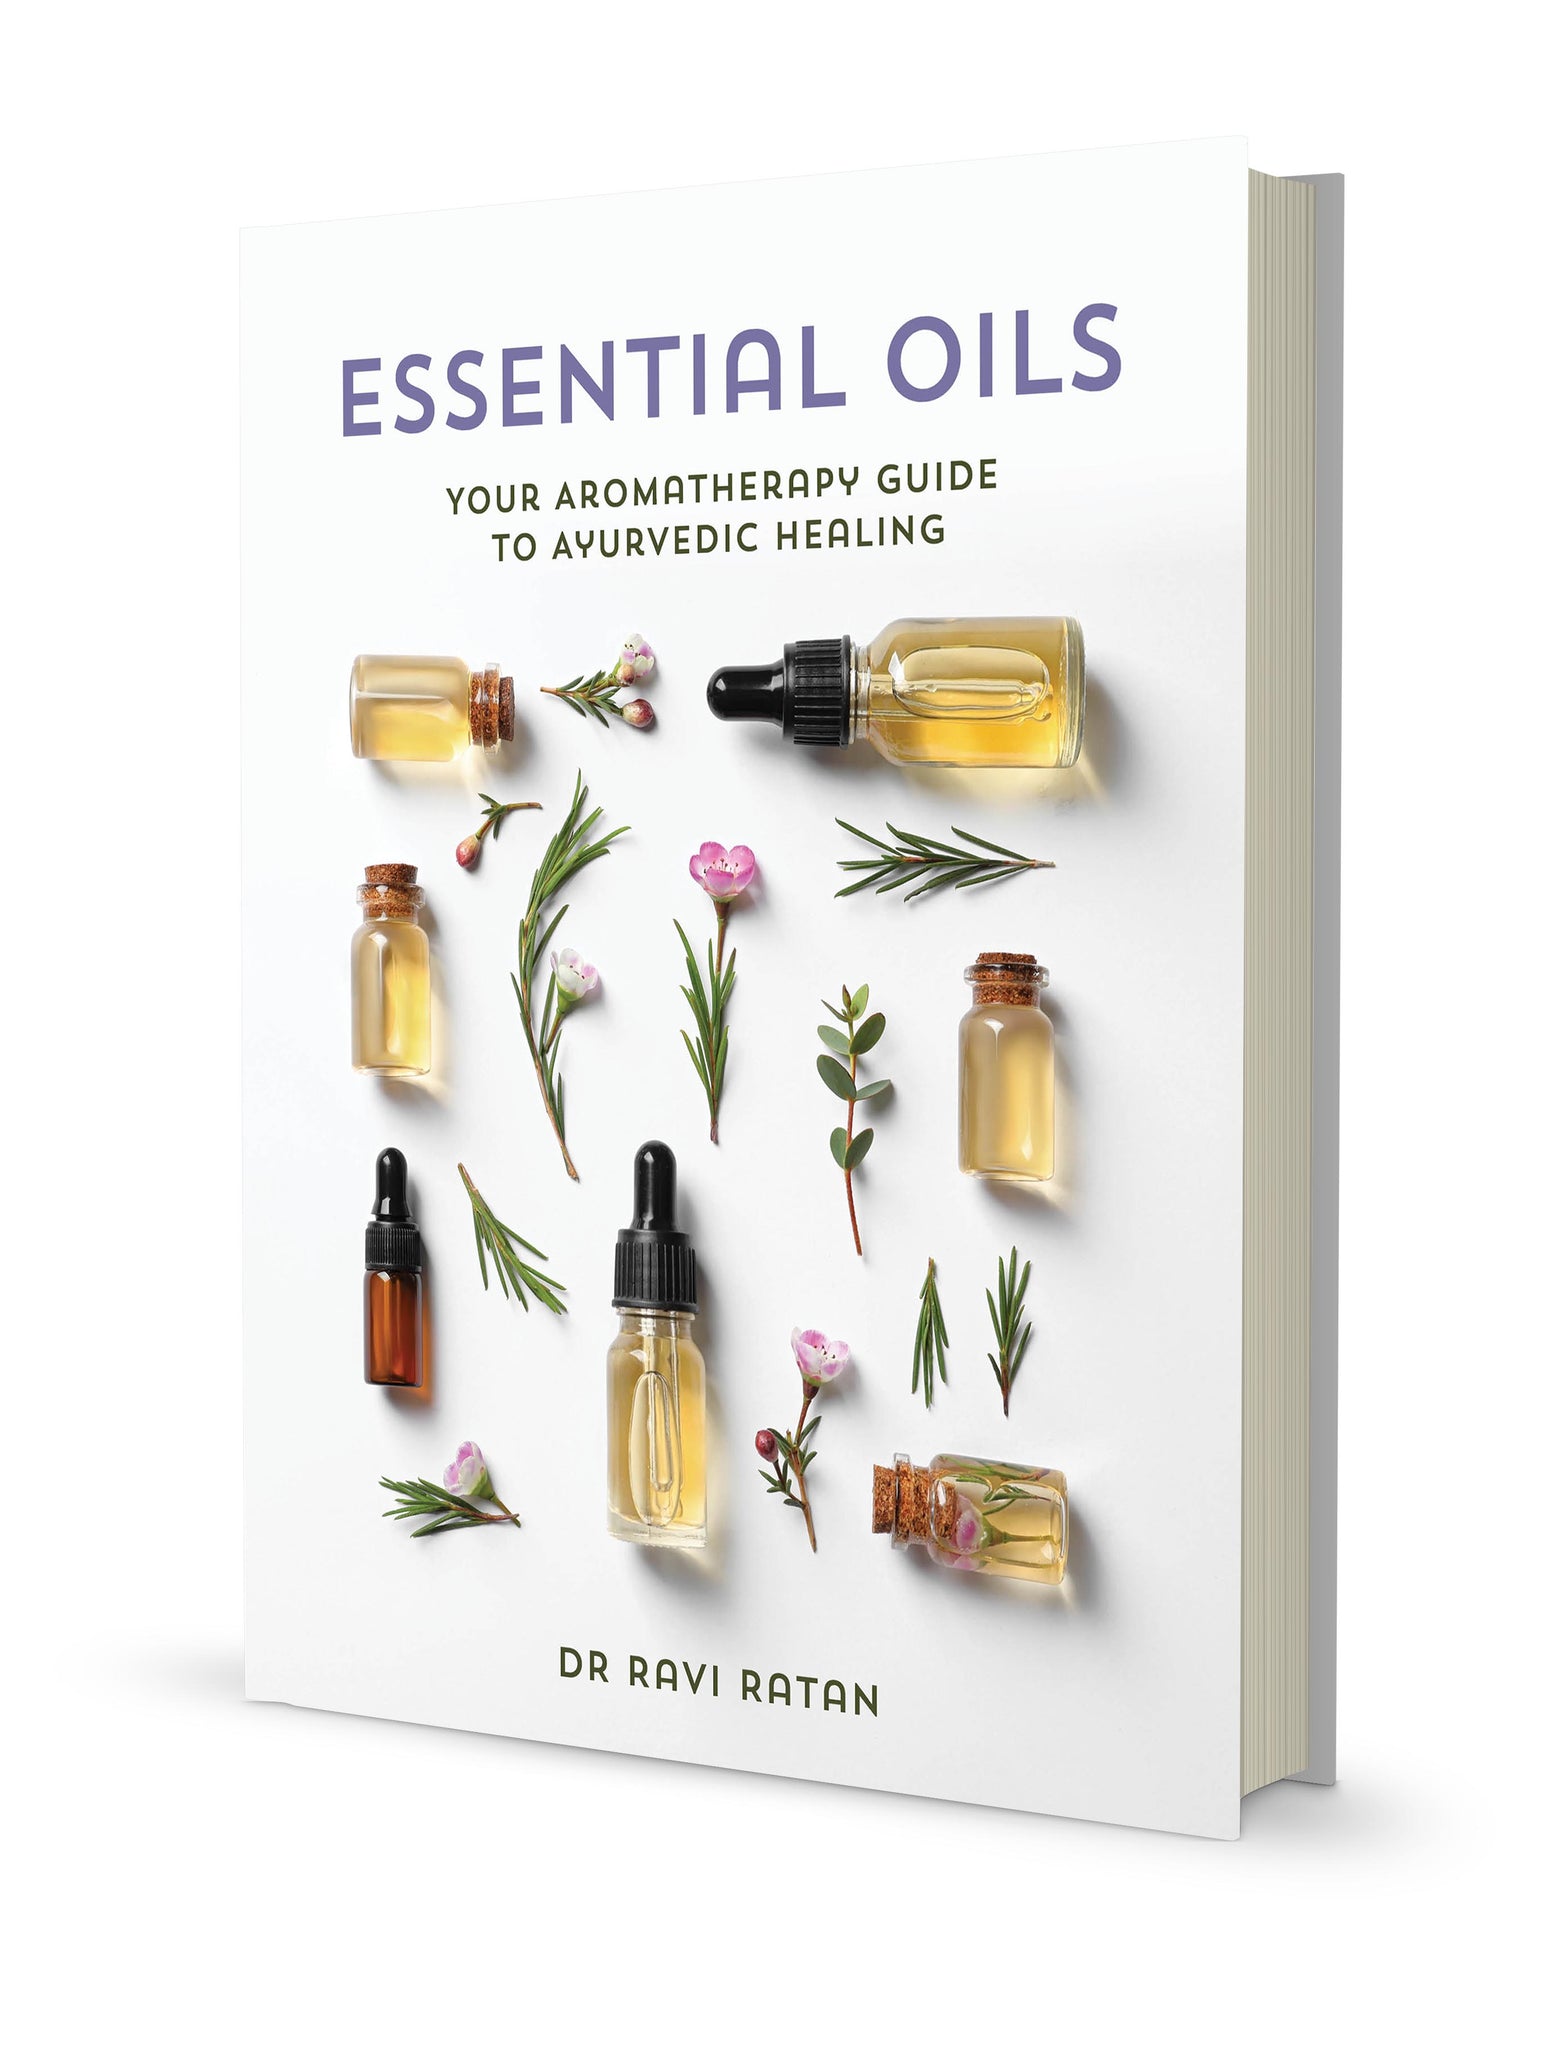 Essential Oils Your Aromatherapy Guide to Ayurvedic Healing Author Dr Ravi Ratan